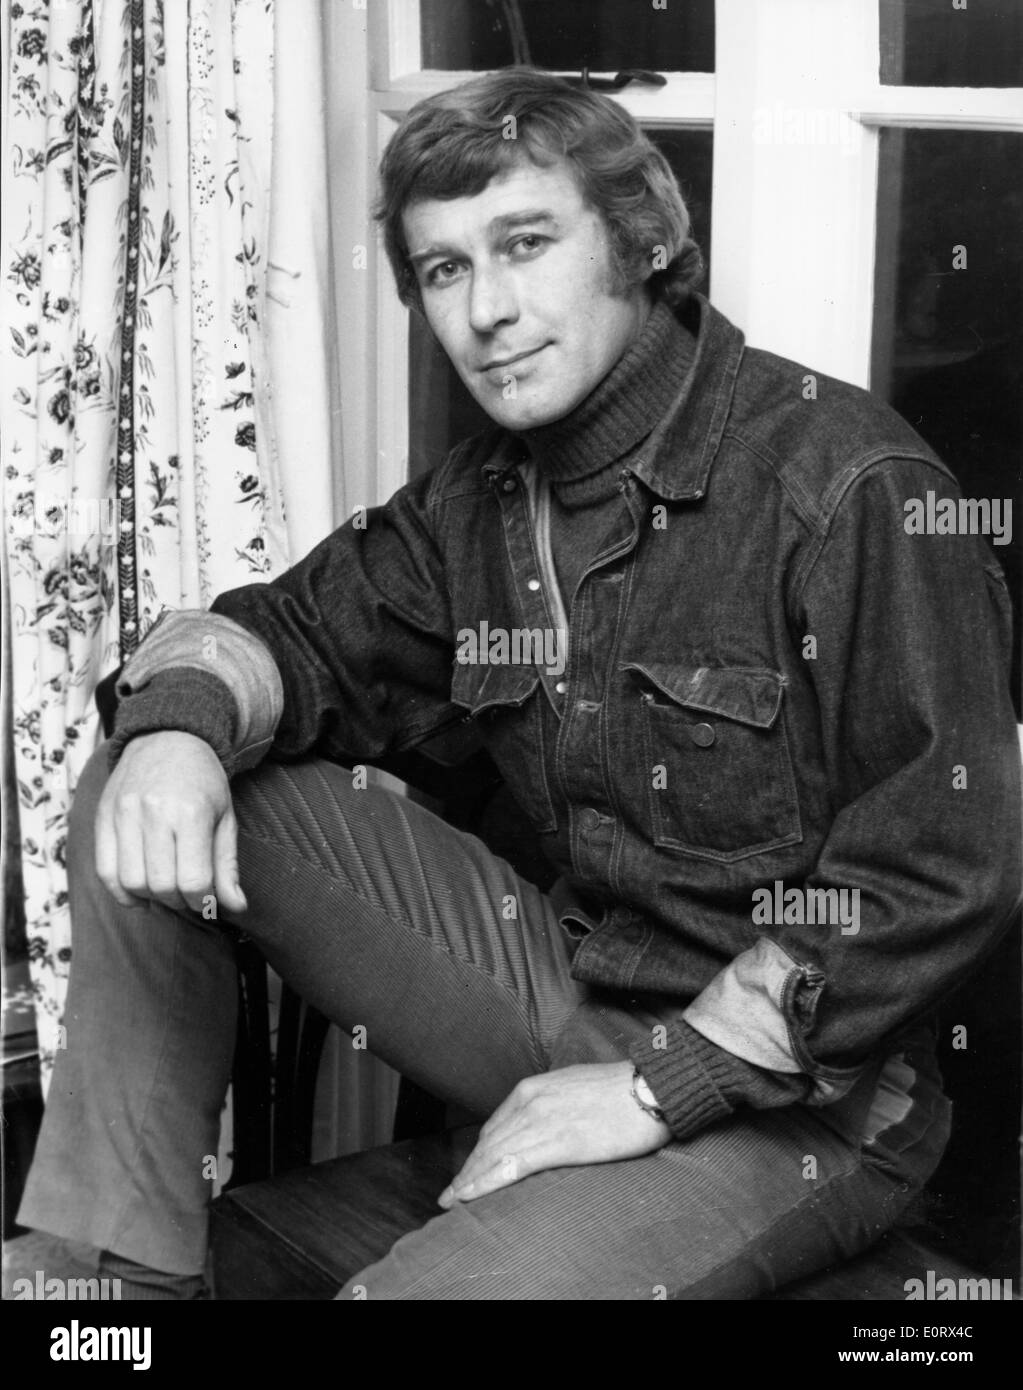 Actor Errol Flynn on window sill at young age Stock Photo